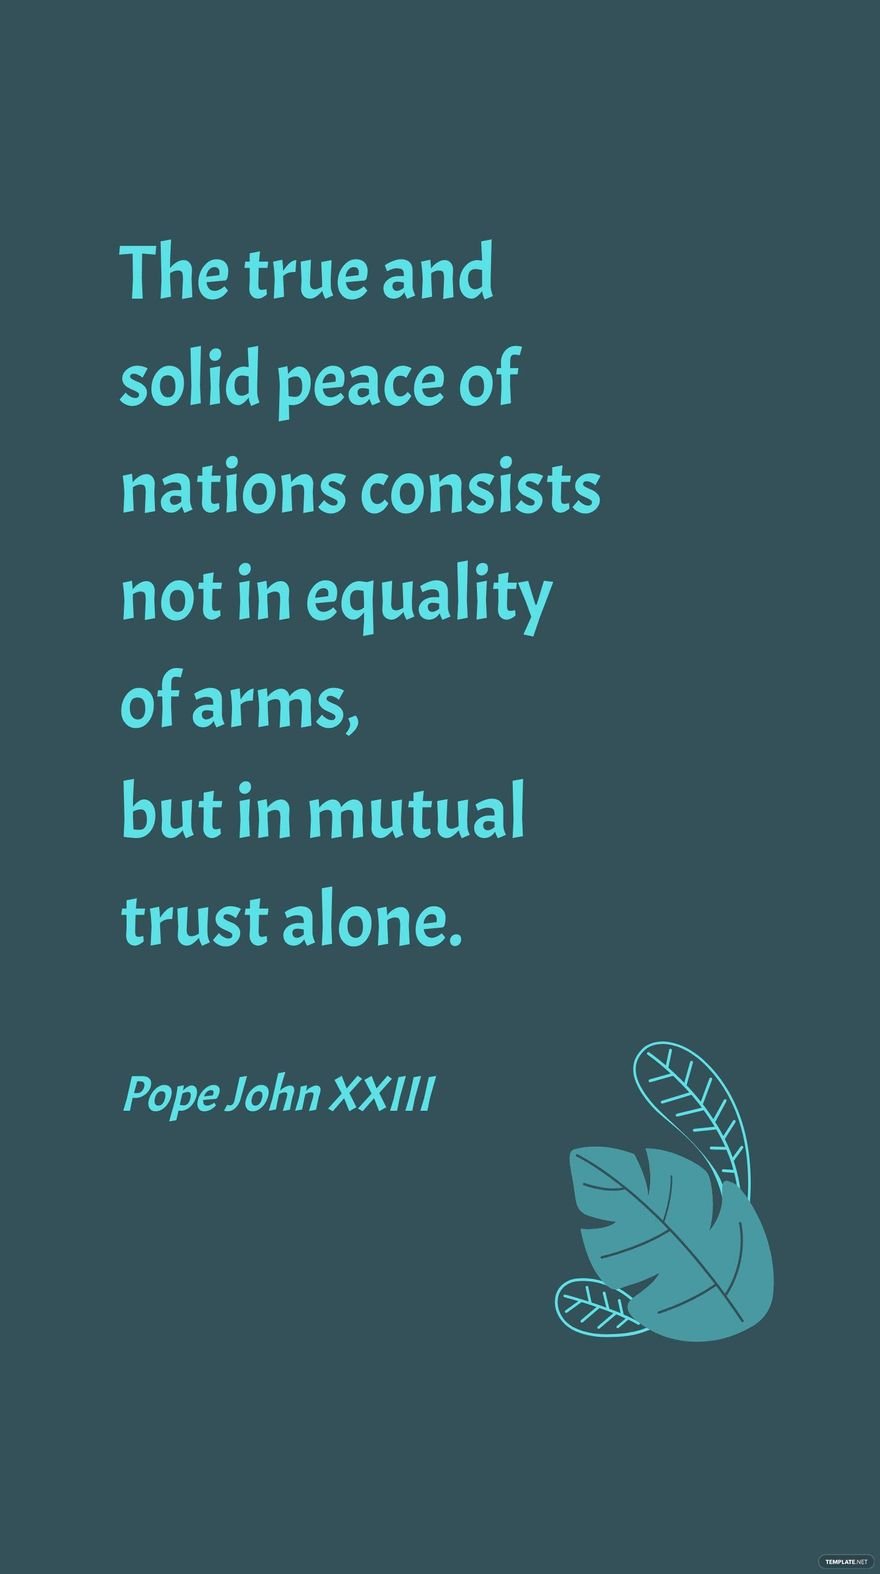 Free Pope John XXIII - The true and solid peace of nations consists not in equality of arms, but in mutual trust alone. in JPG